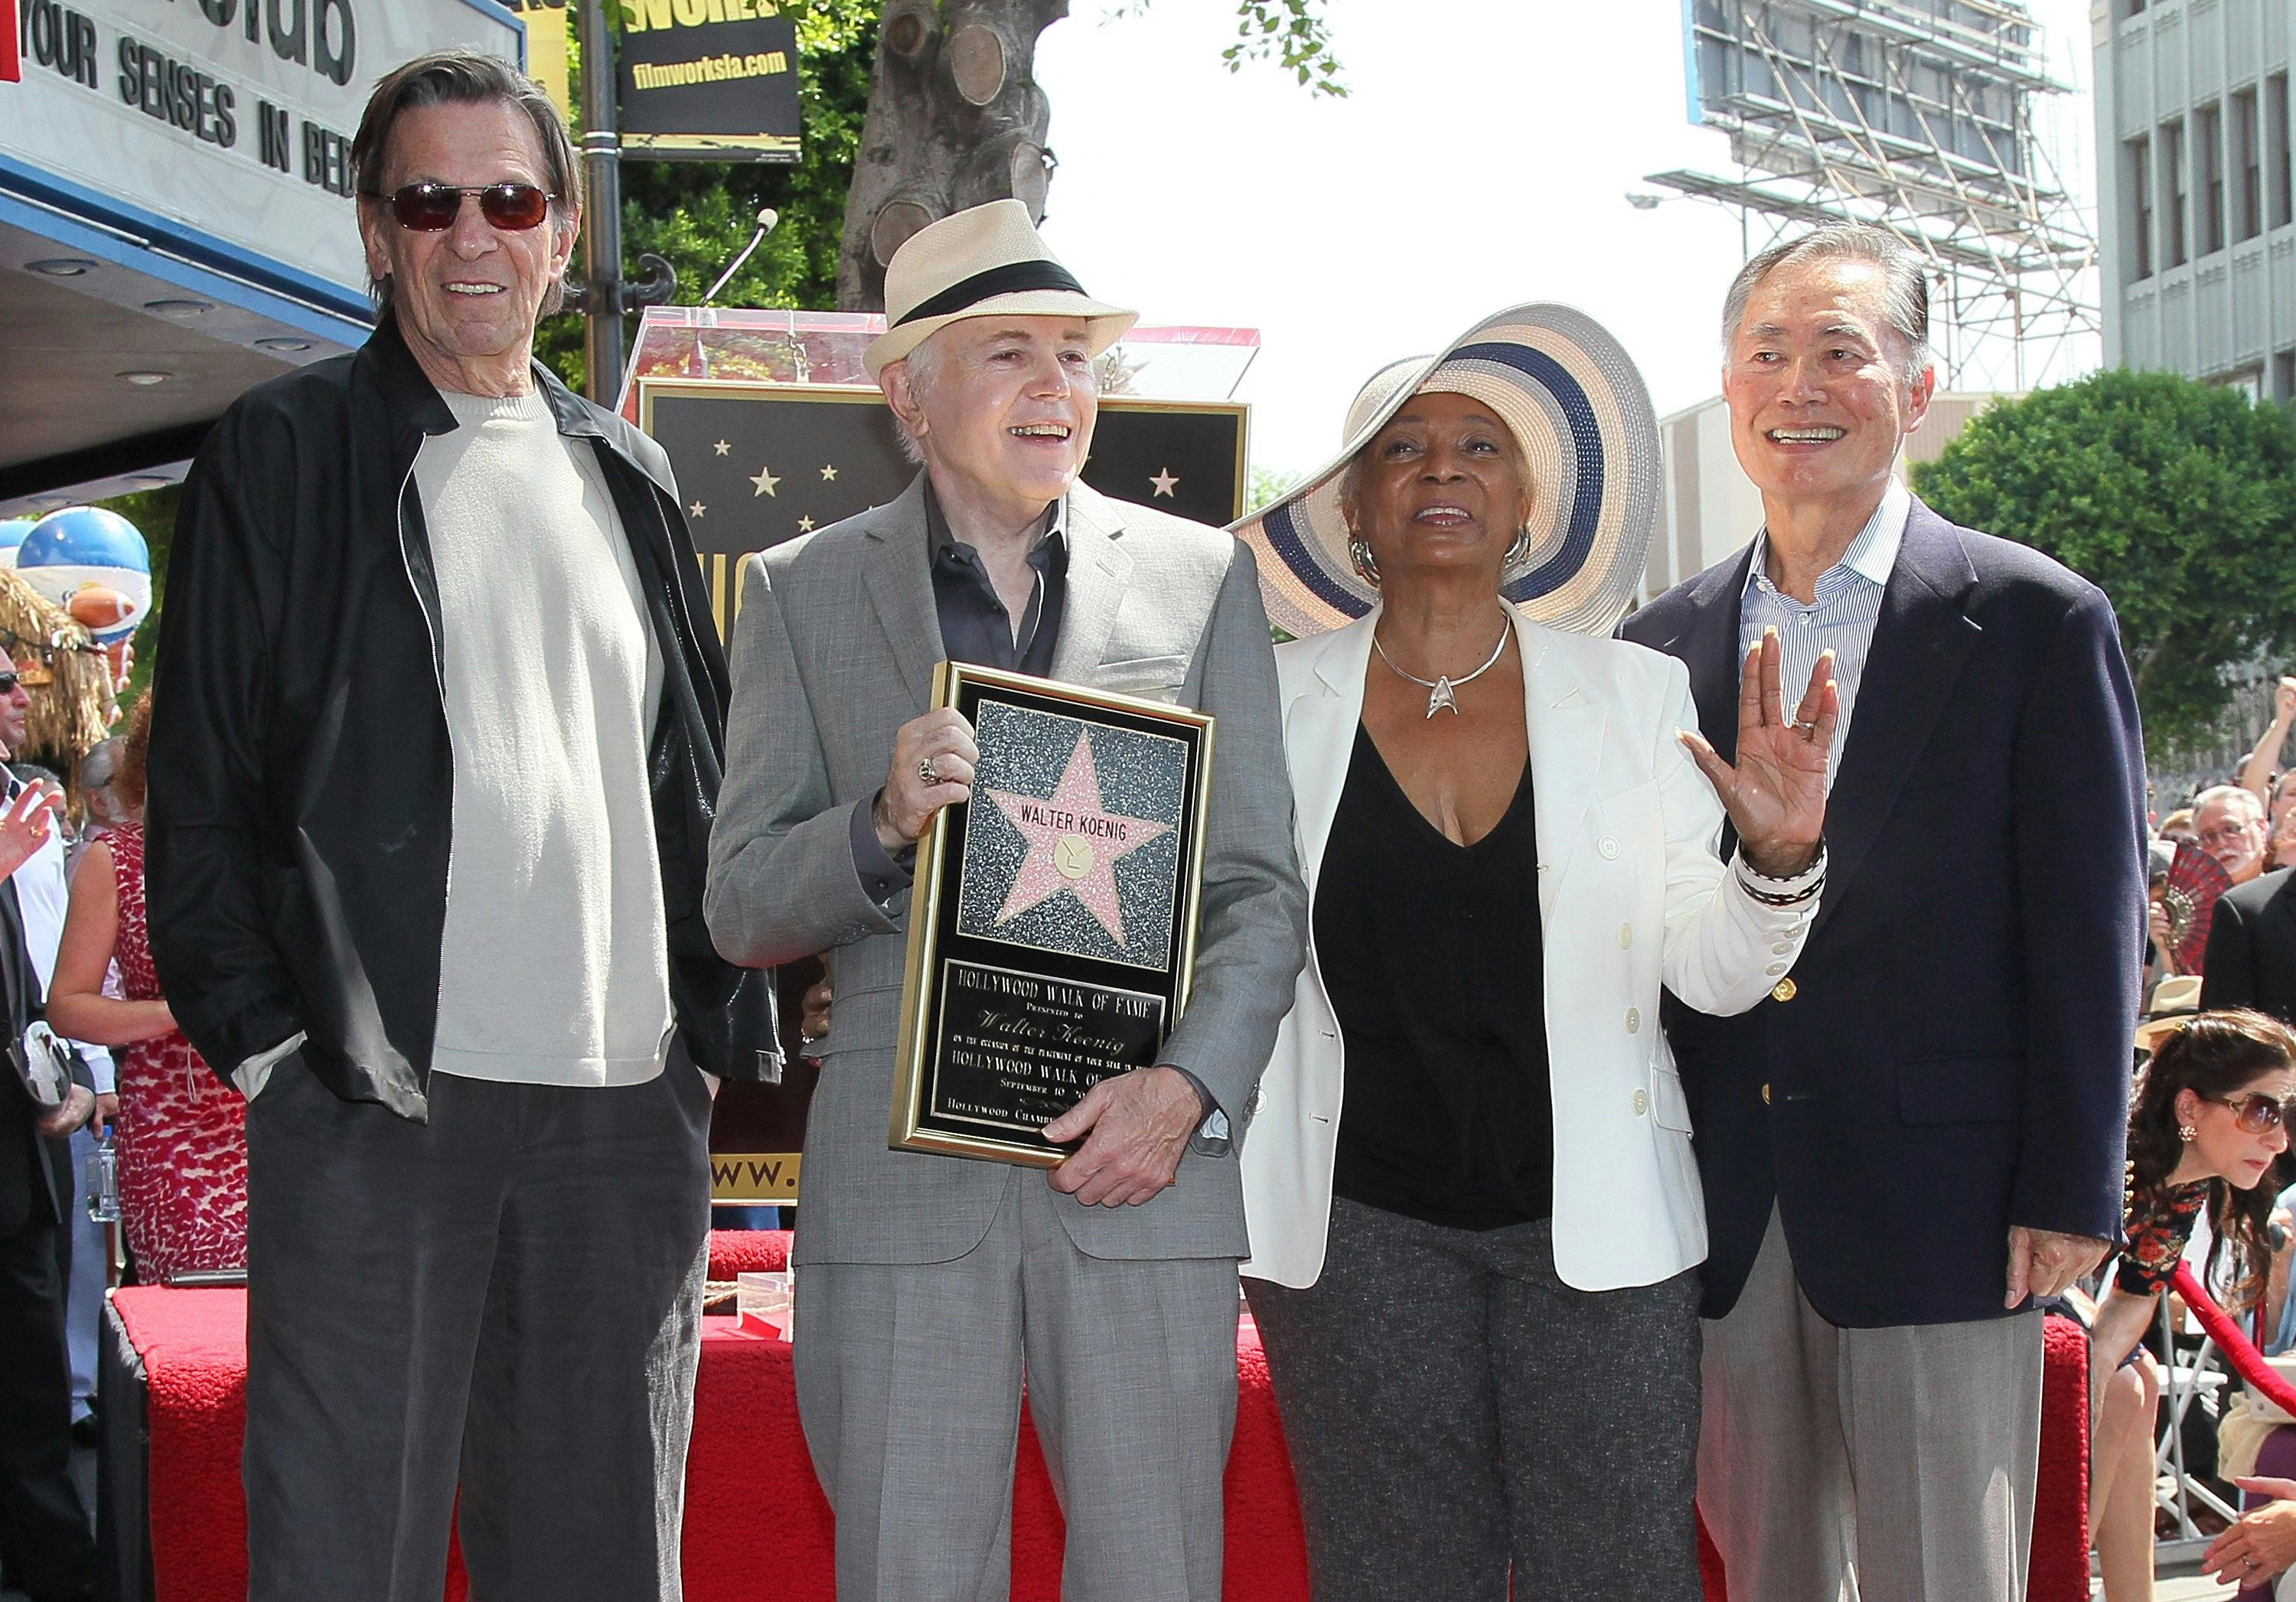 Actors Leonard Nimoy, Walter Koenig, Nichelle Nichols and George Takei attend Koenig being honored with a star on the Hollywood Walk of Fame on September 10, 2012 in Hollywood, California. 